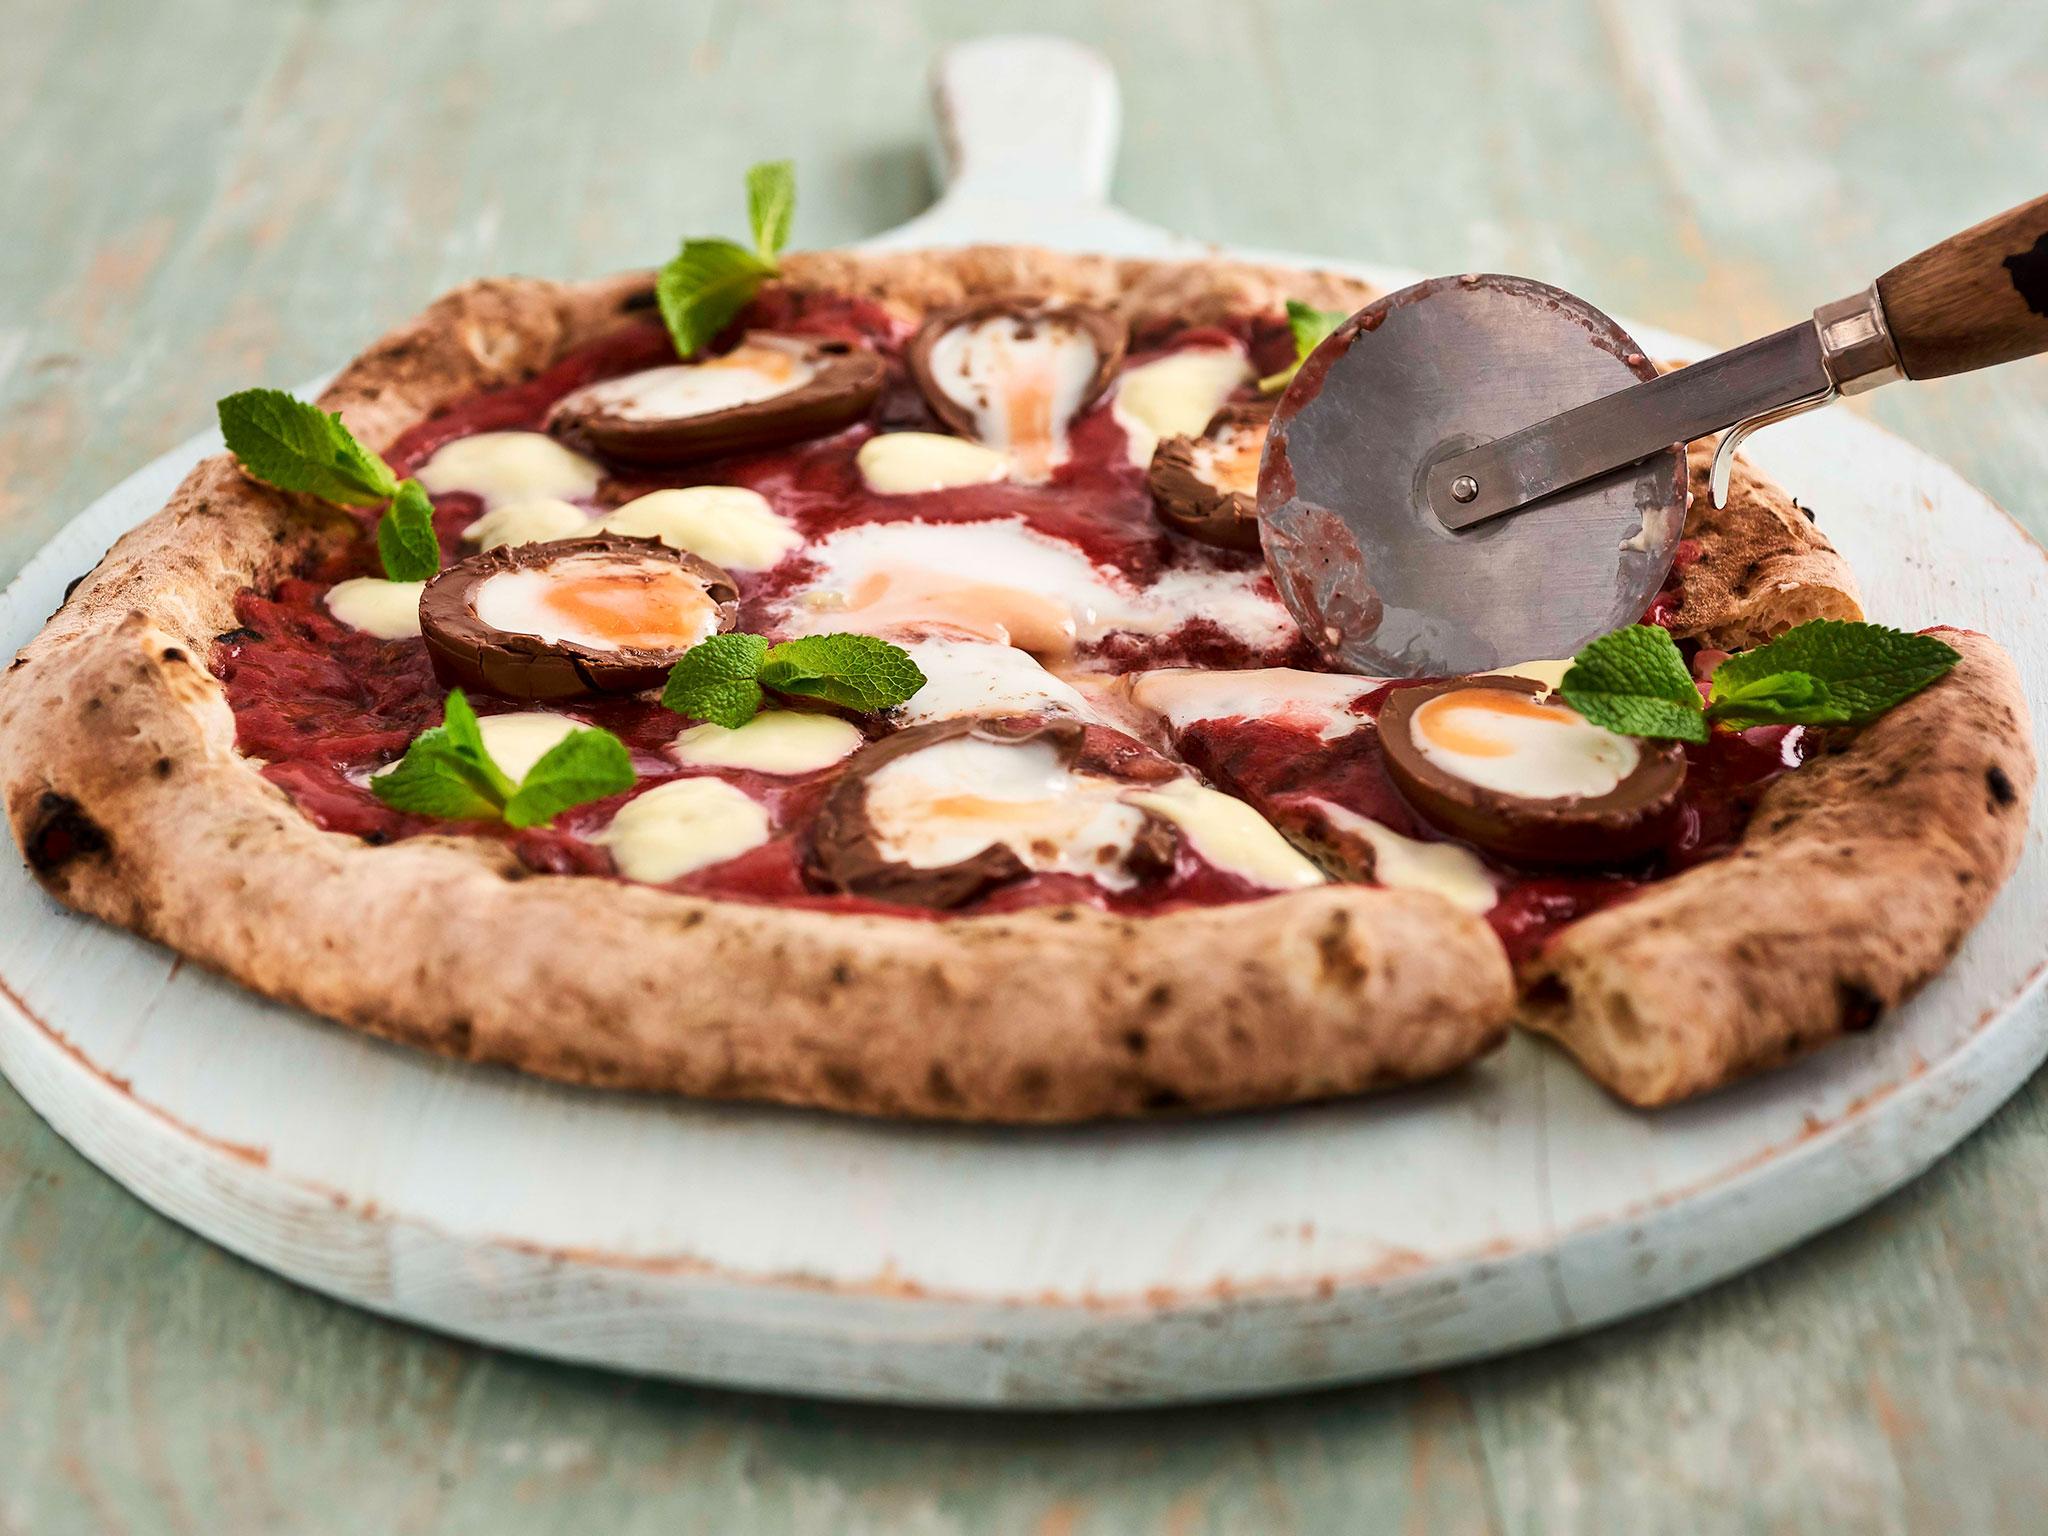 The pizza will be available for Deliveroo customers from Crust Bros from April 7-14